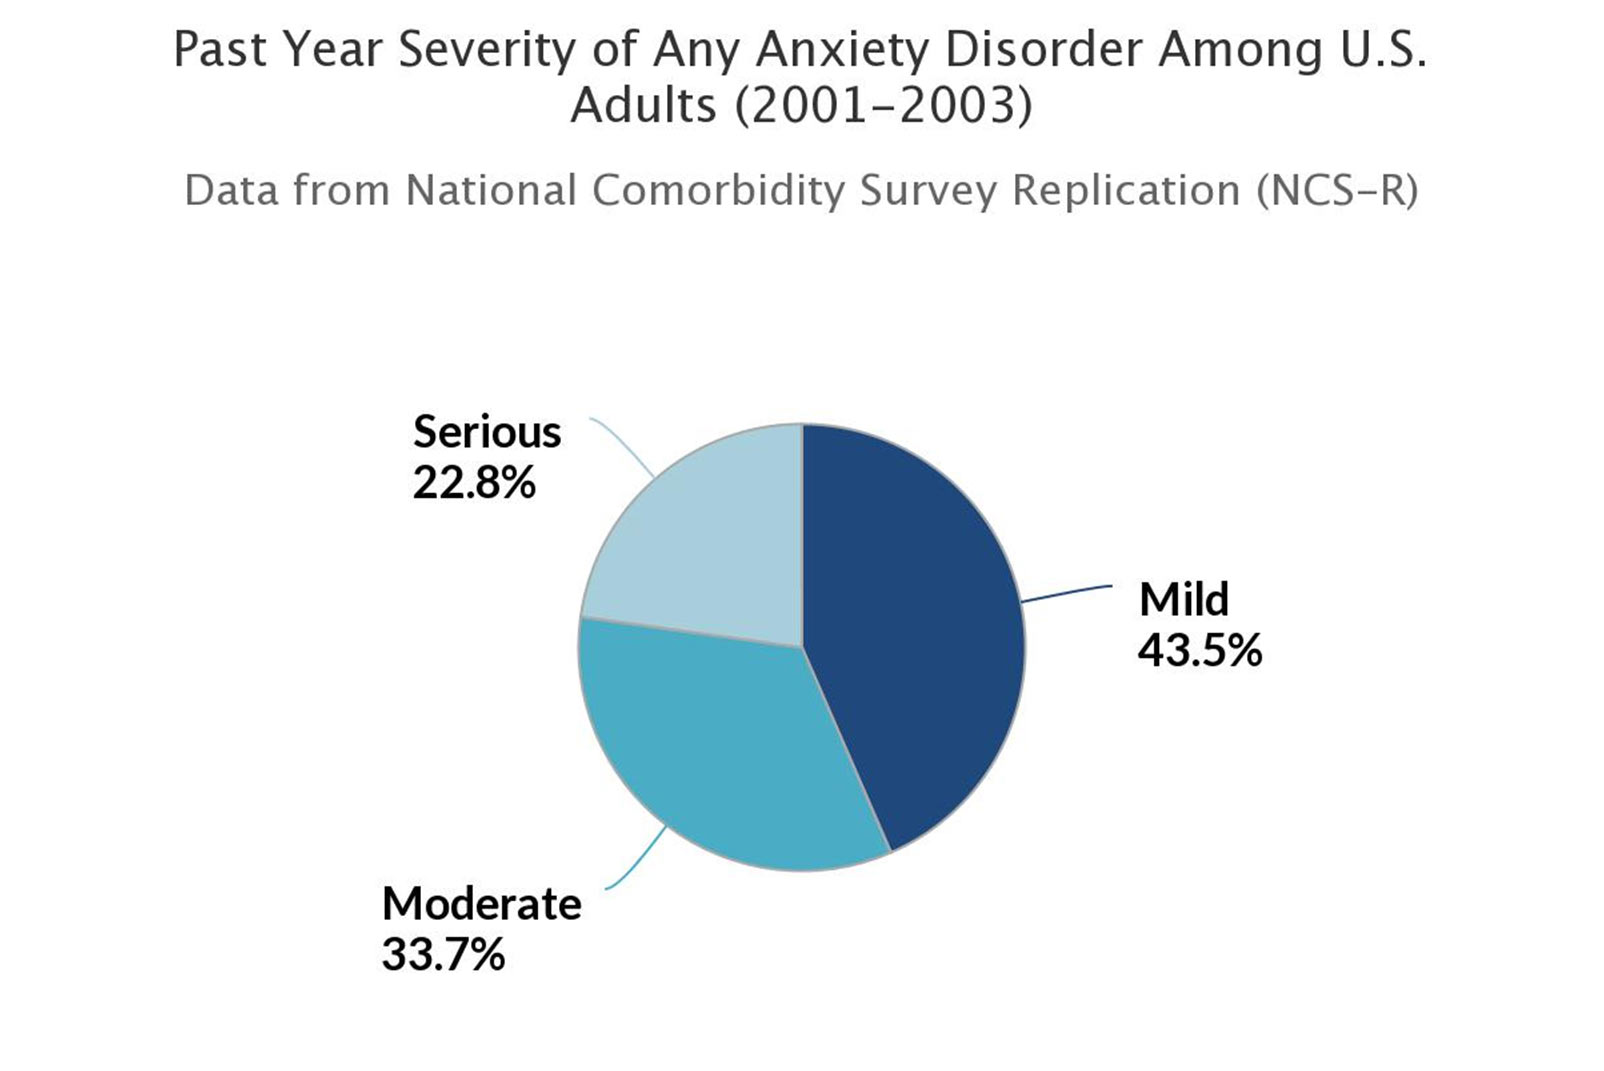 Past Year Severity of anxiety disorder (2001-2003)